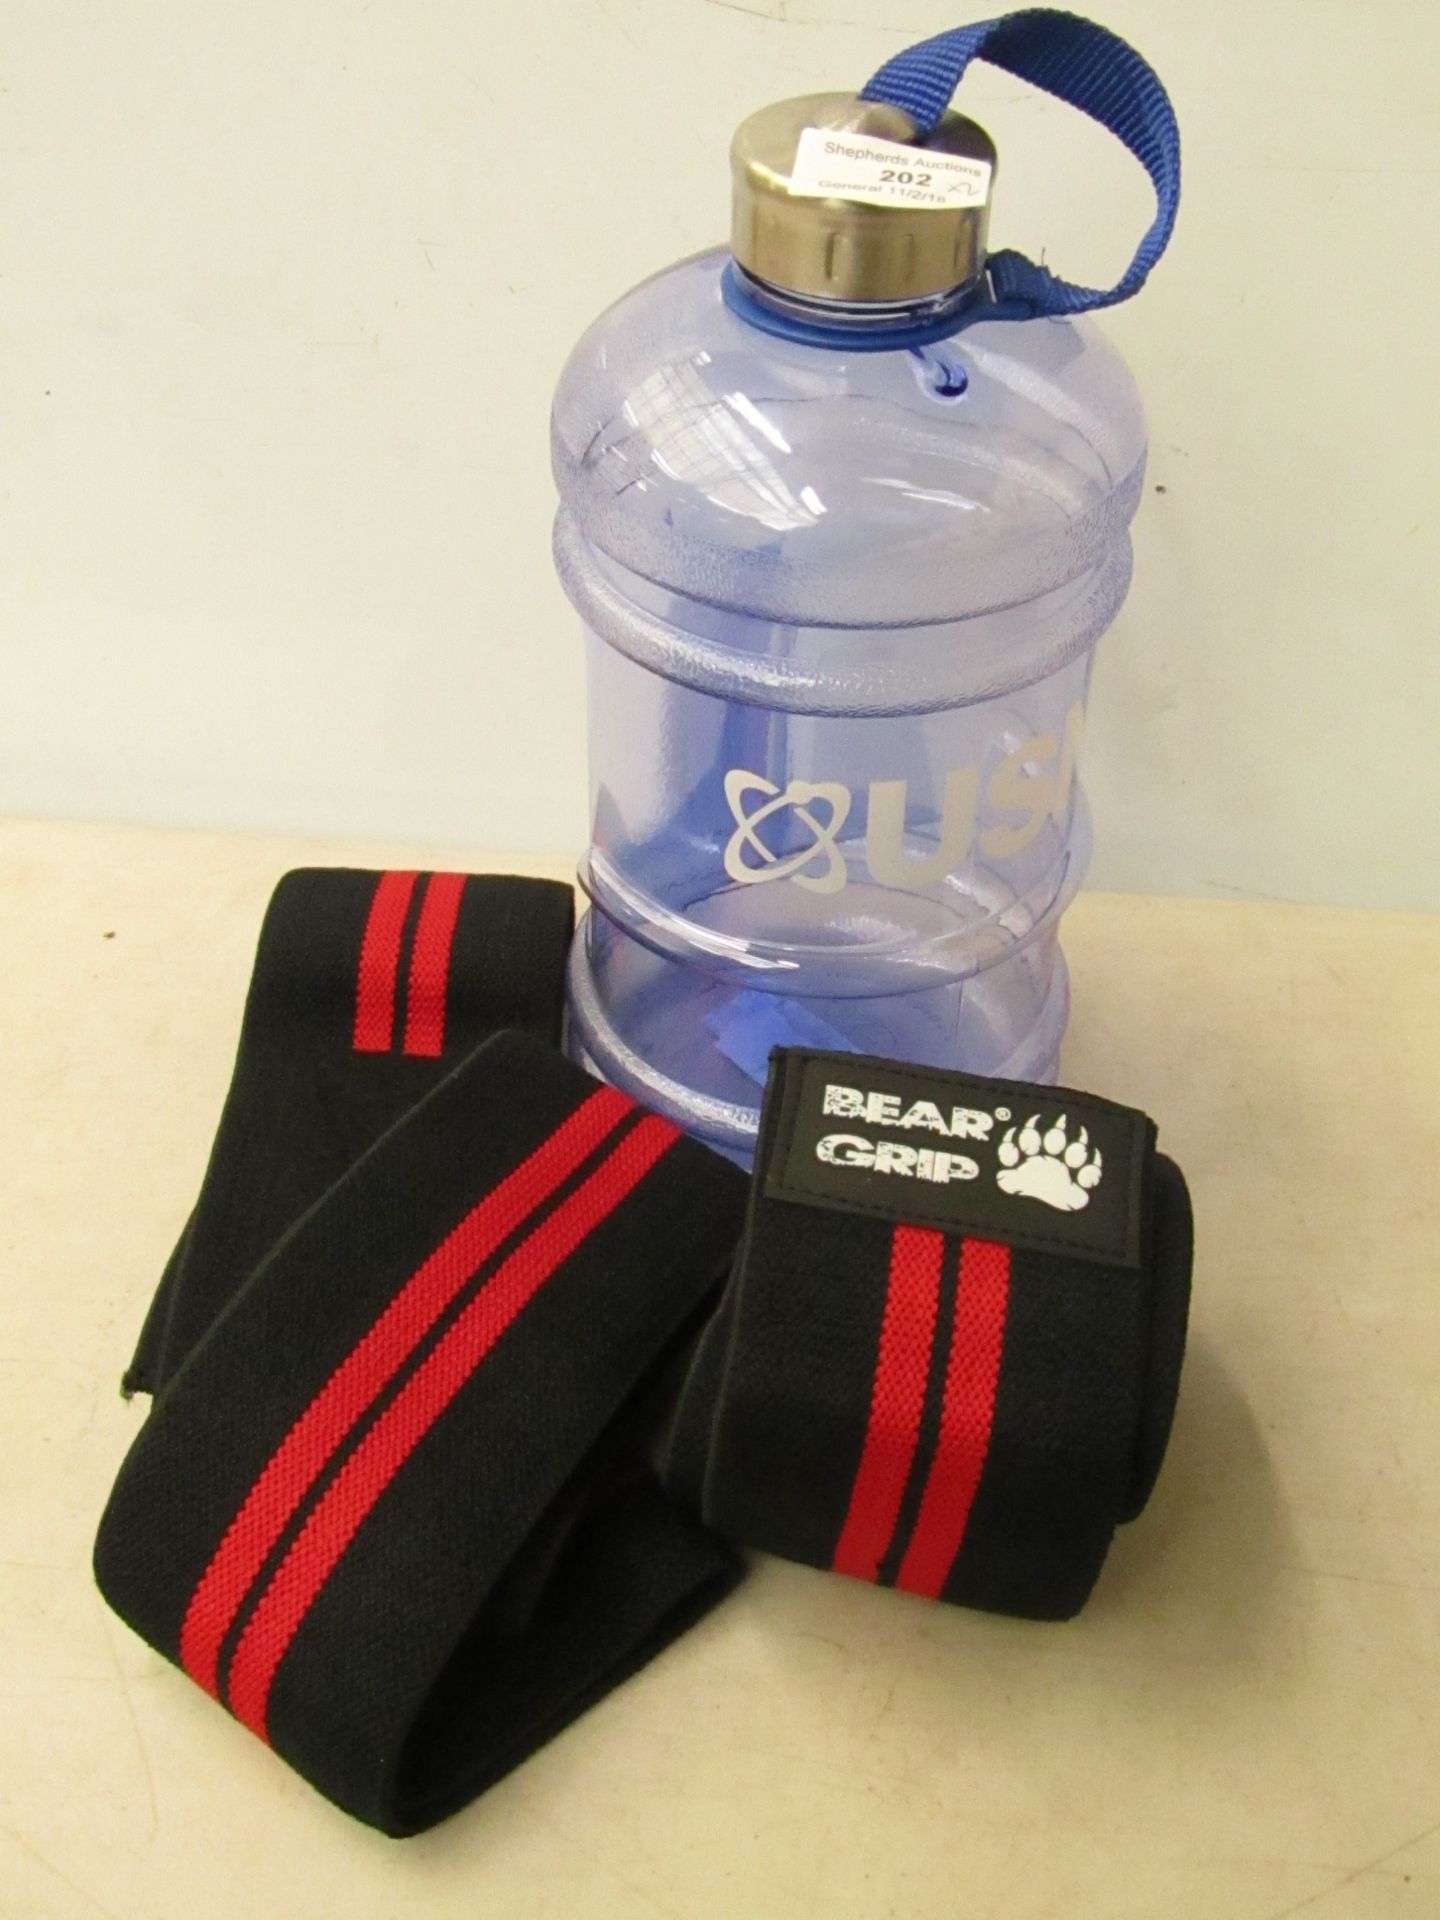 Bear Grip sport straps with USN water flask.